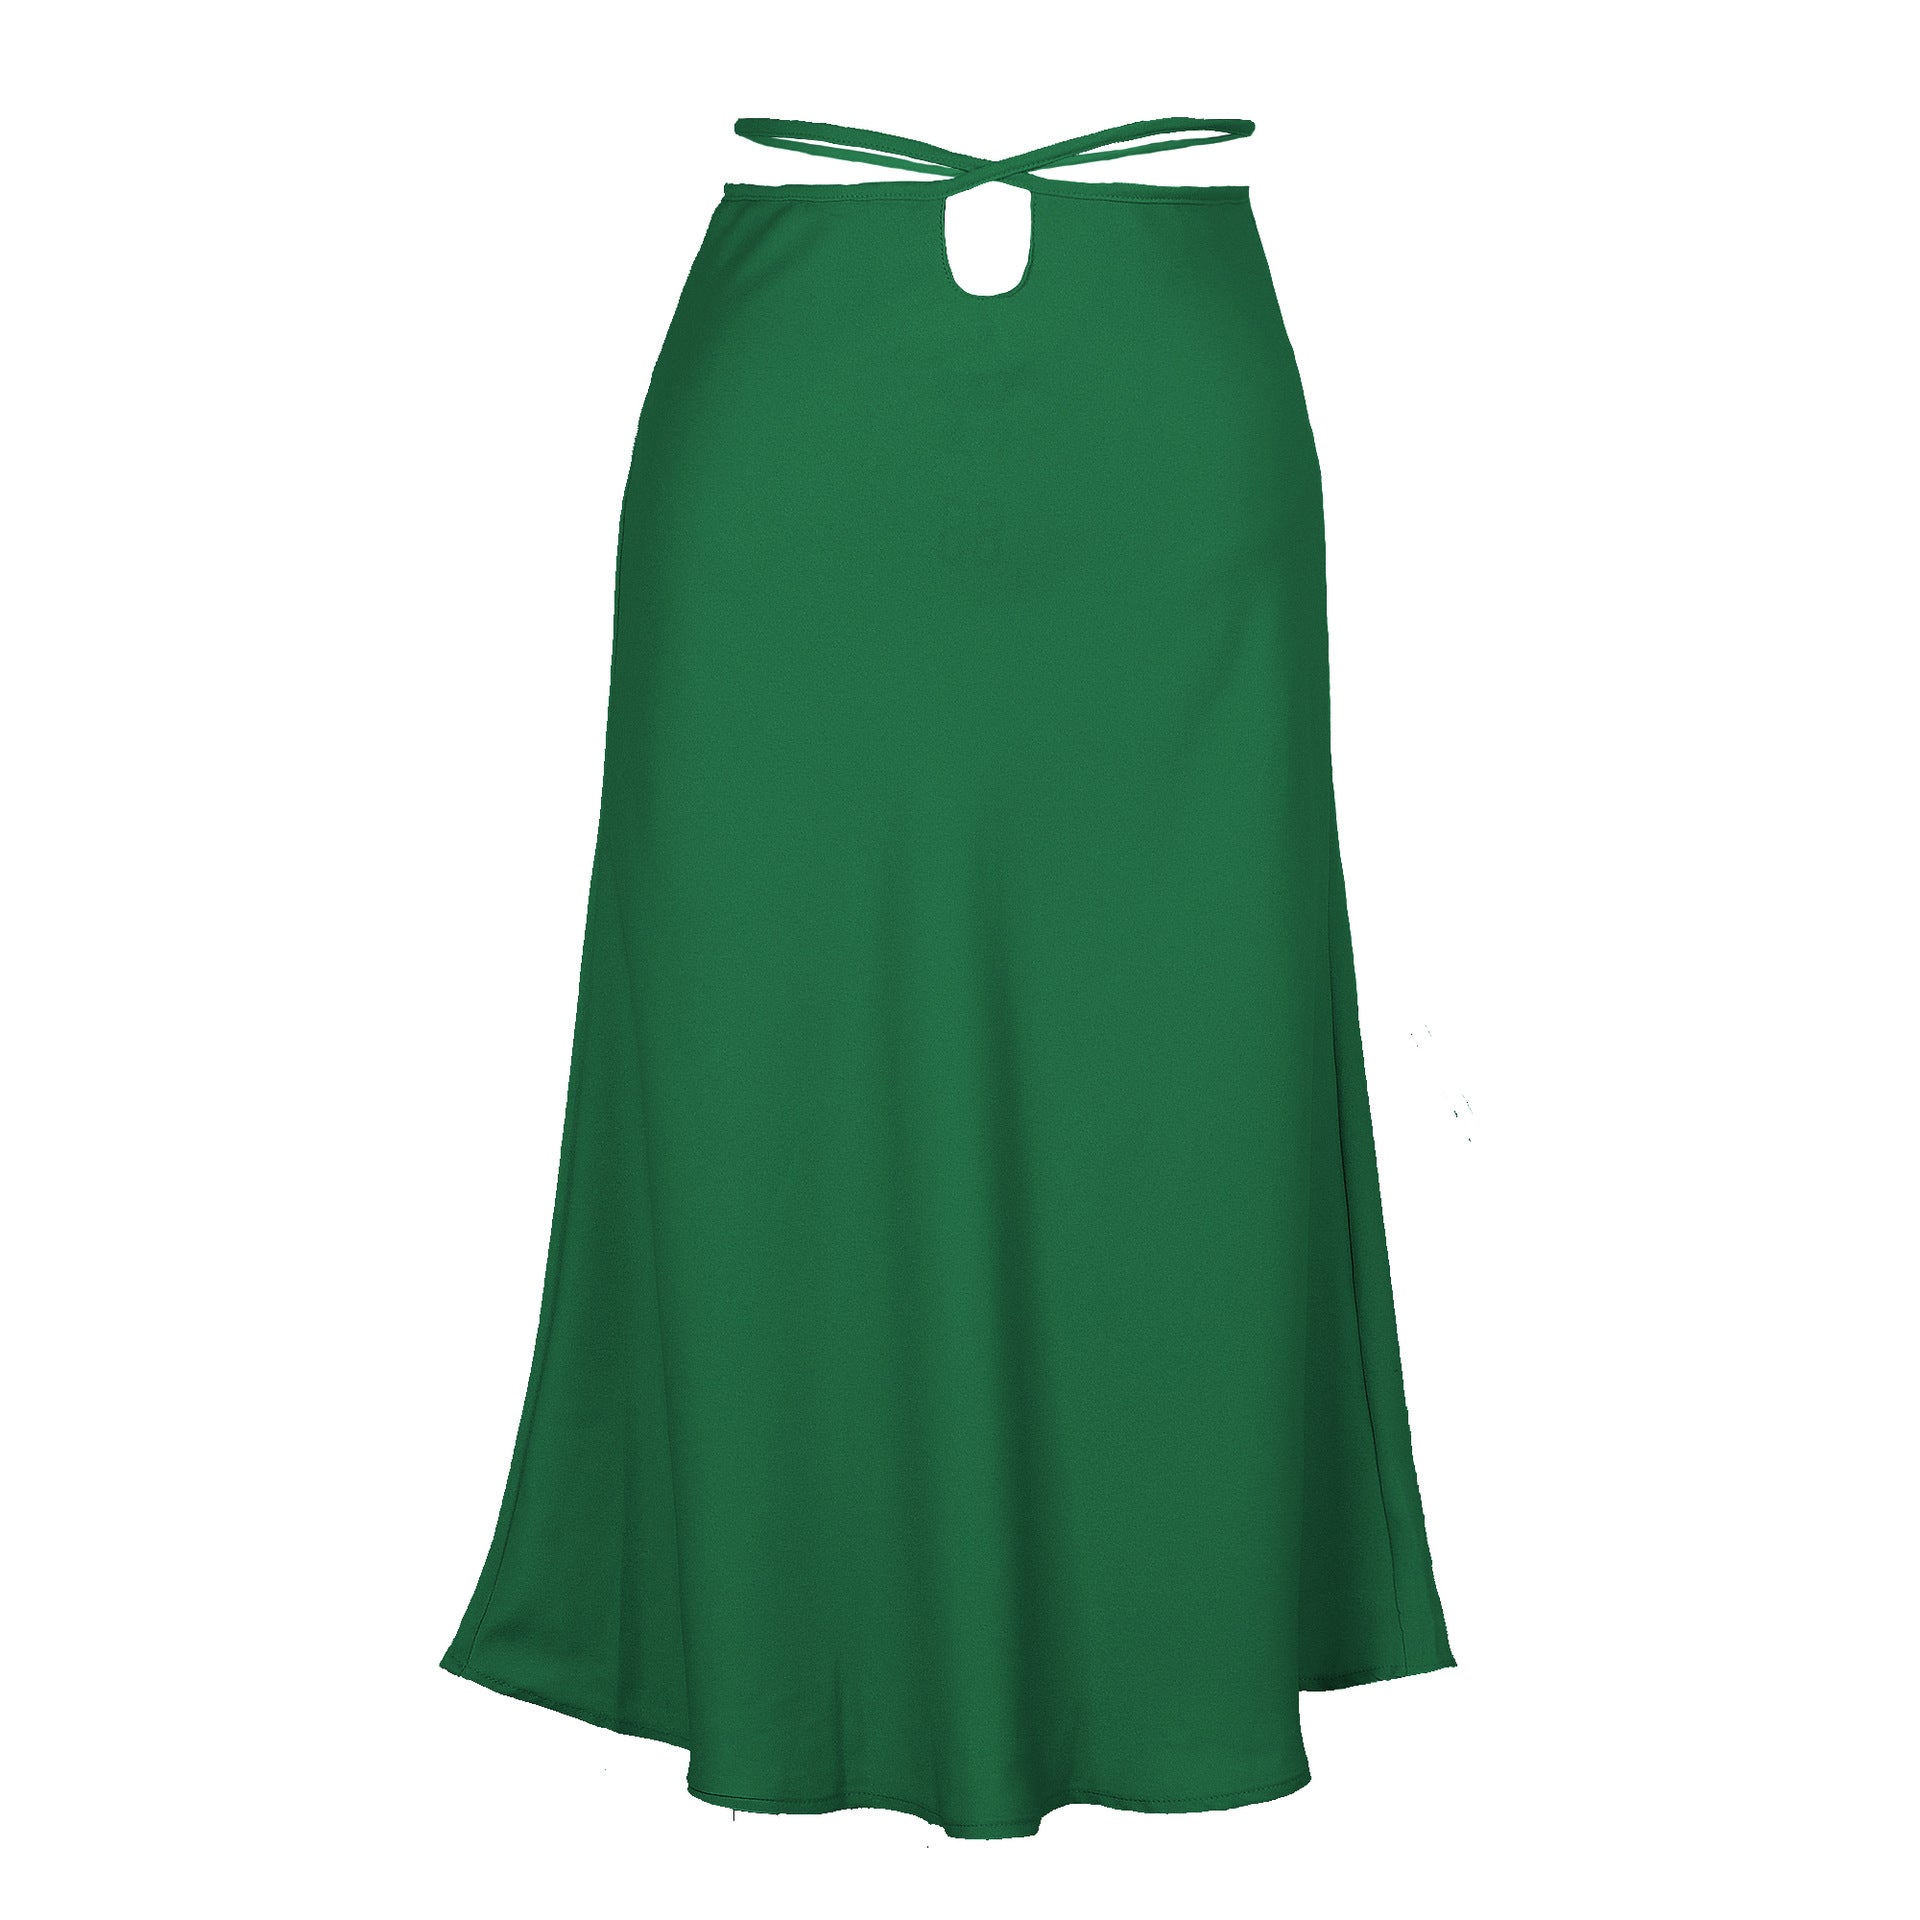 Women's Satin Solid Color Zipper Fashion Simple Skirts